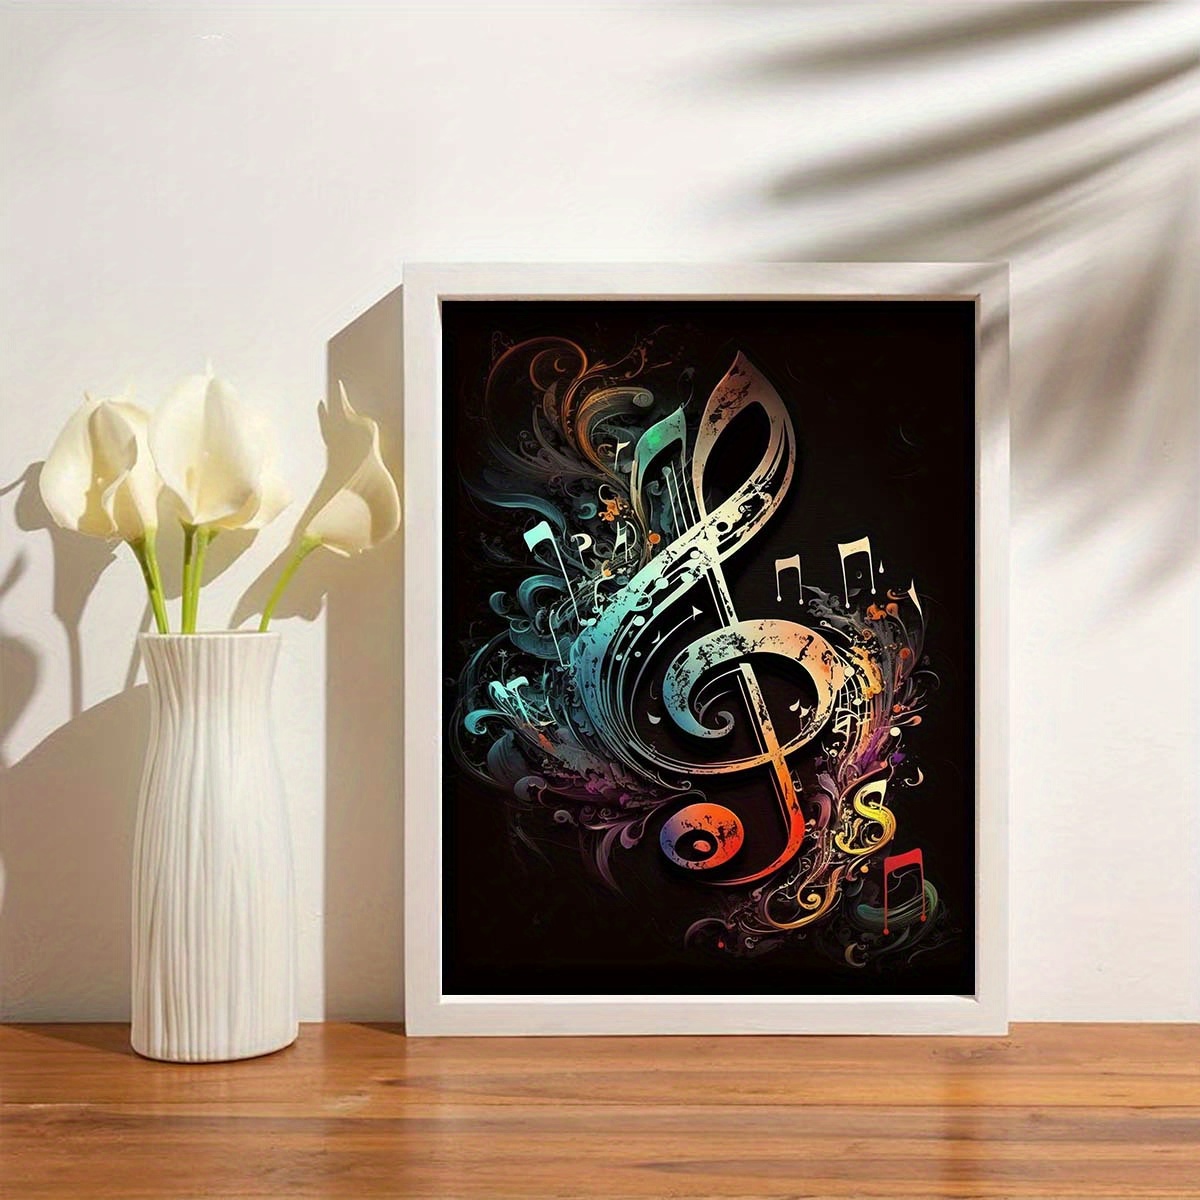  LEARTDYY Diamond Painting Vintage Music Note Retro Musical  Music Studio Harp Kit for Adults Diamond Art Painting by Number Kits Gem  Art Wall Home Decor 30x40cm/12x16in